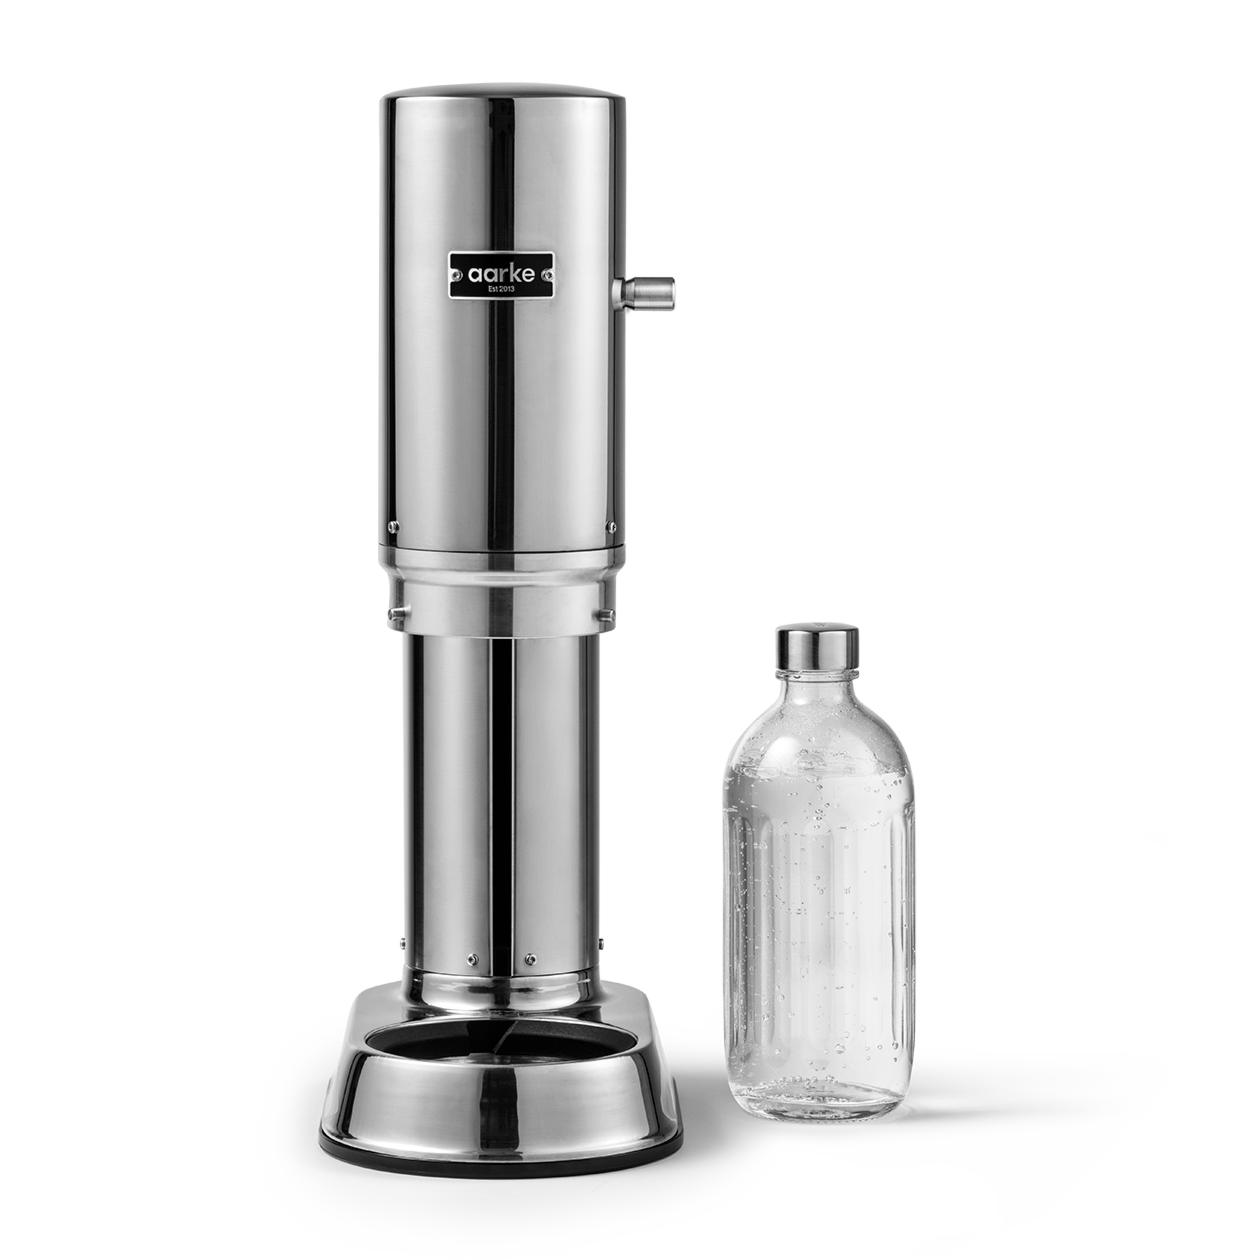 Carbonator Pro in Stainless Steel pictured beside the Glass Bottle for the Carbonator Pro.